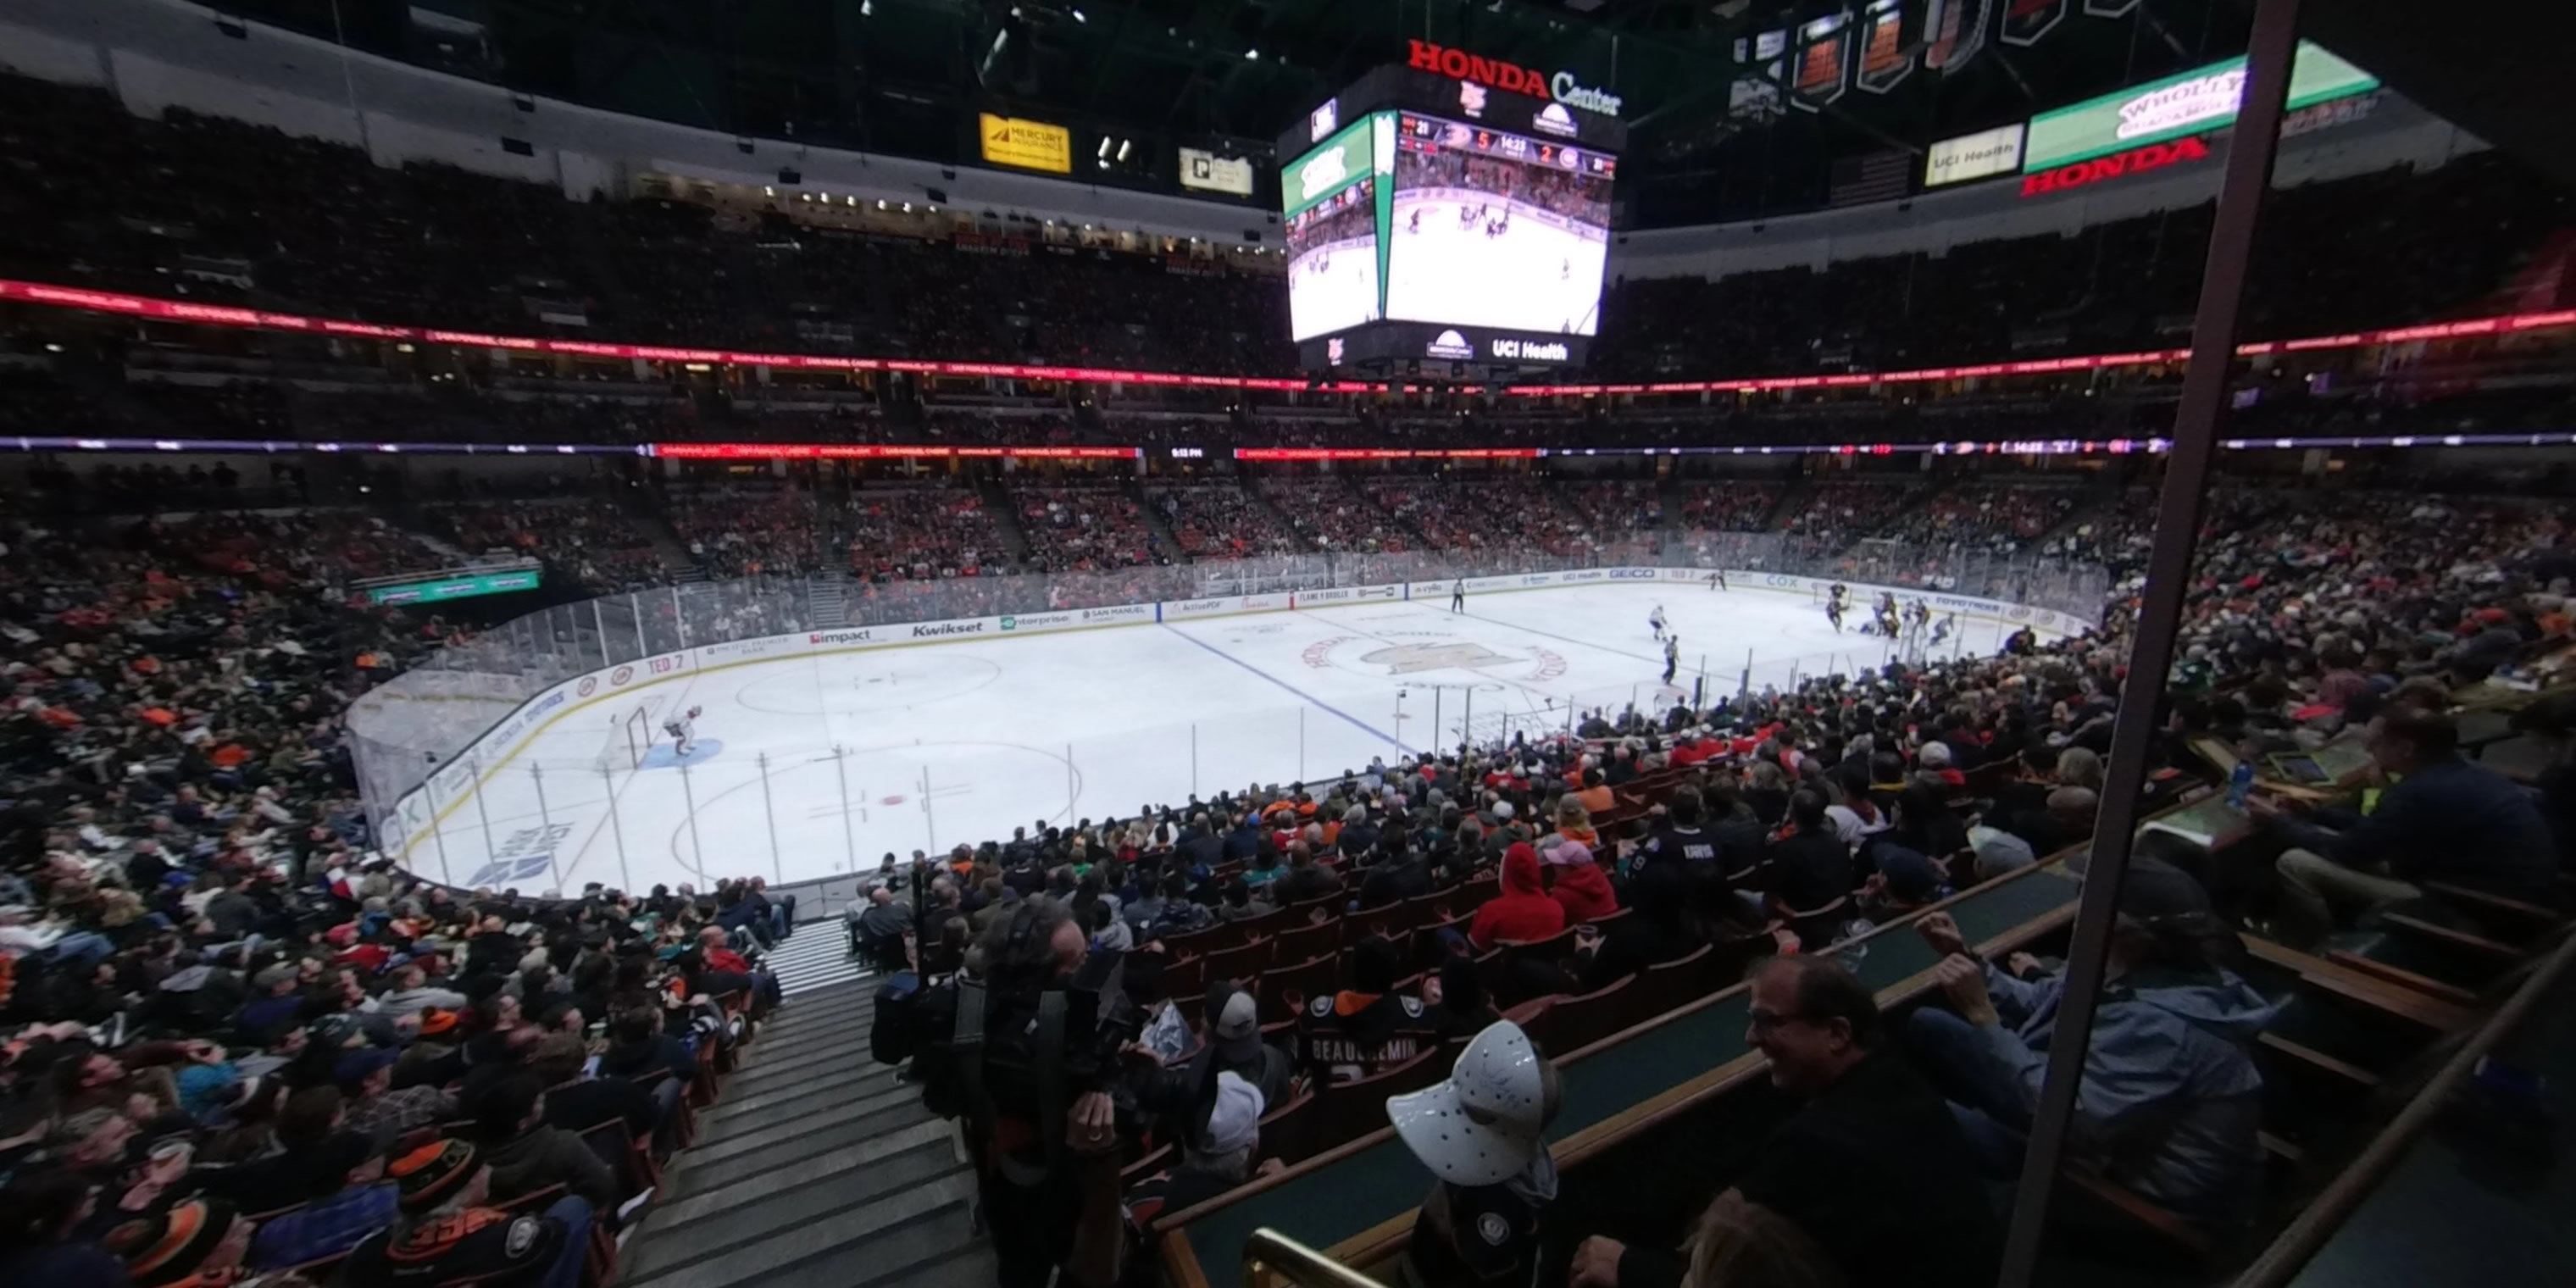 section 210 panoramic seat view  for hockey - honda center